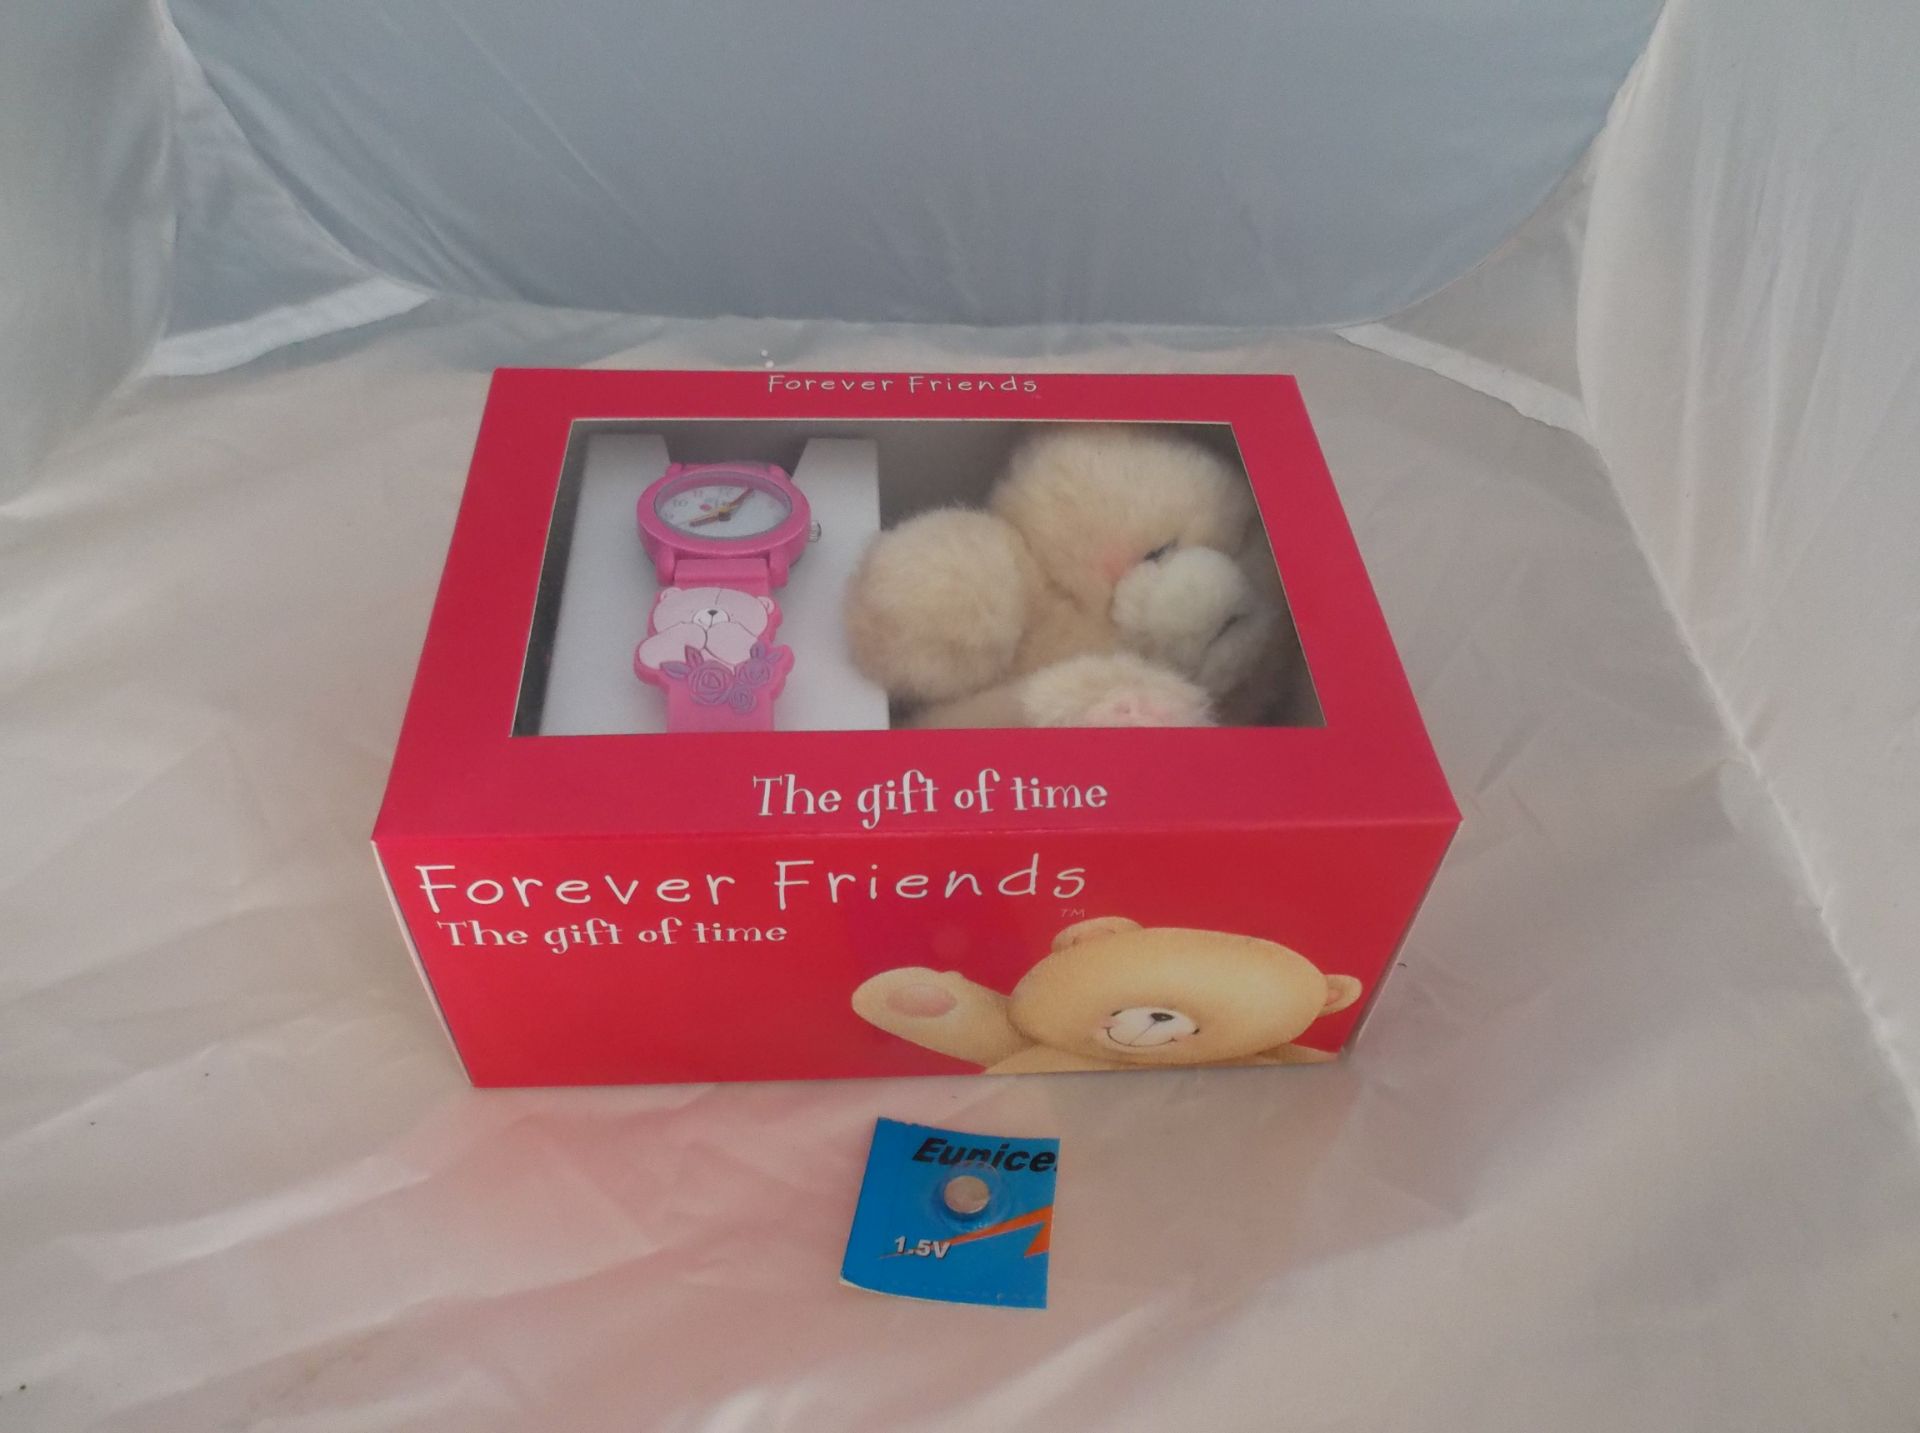 2 X 5 Forever Friends Watch & Teddy Set - Image 3 of 7